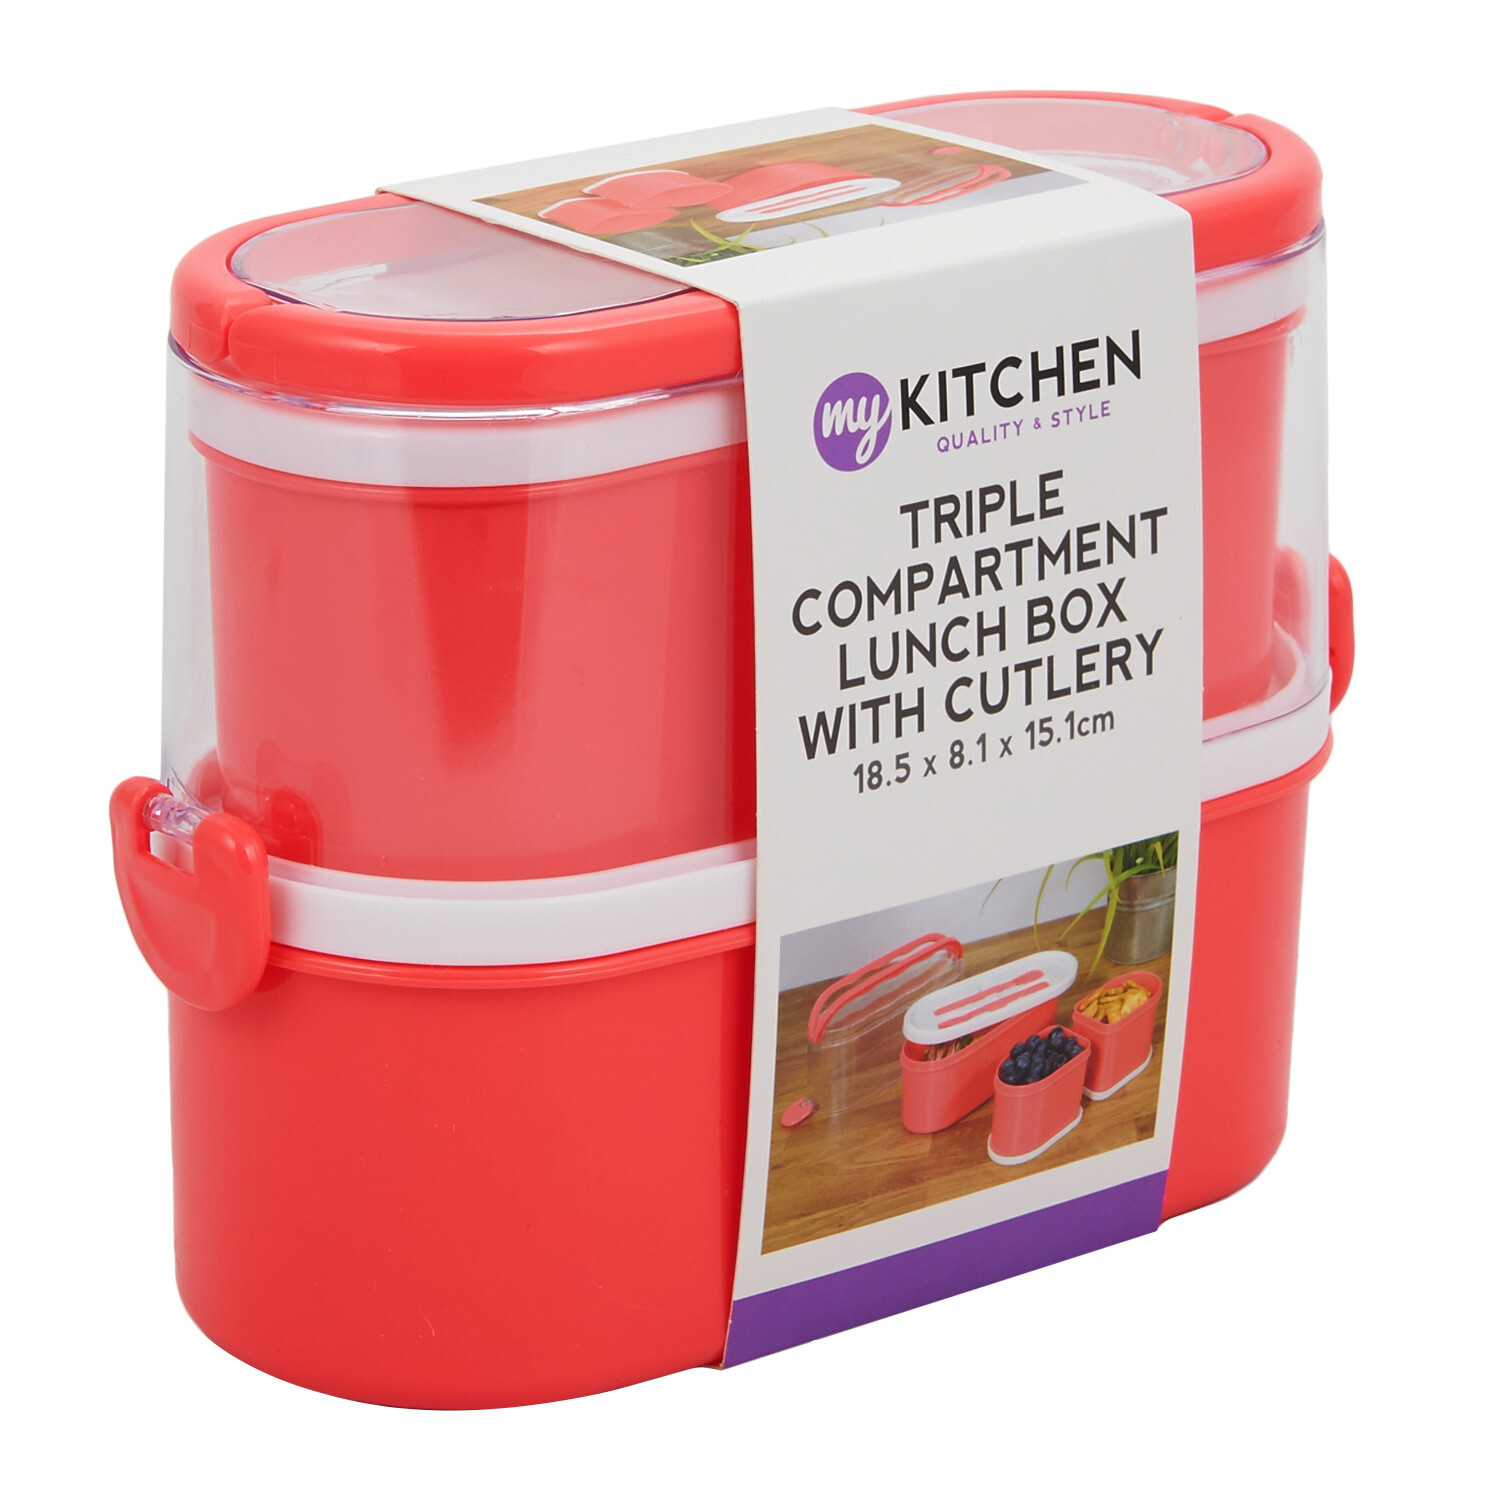 Triple Compartment Lunch Box - Red Image 2